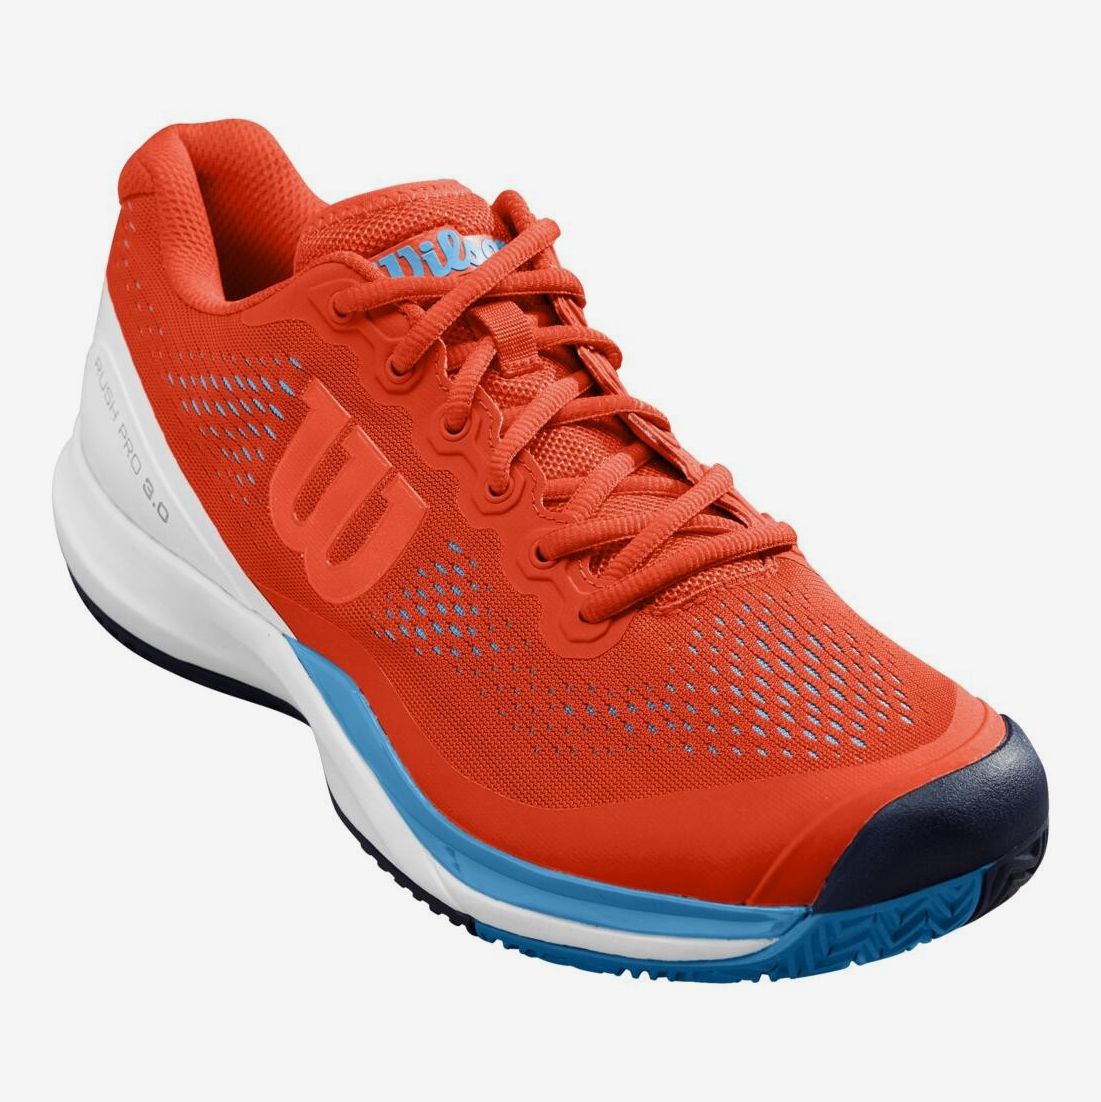 8 Best Tennis Shoes for Men 2020 | The 